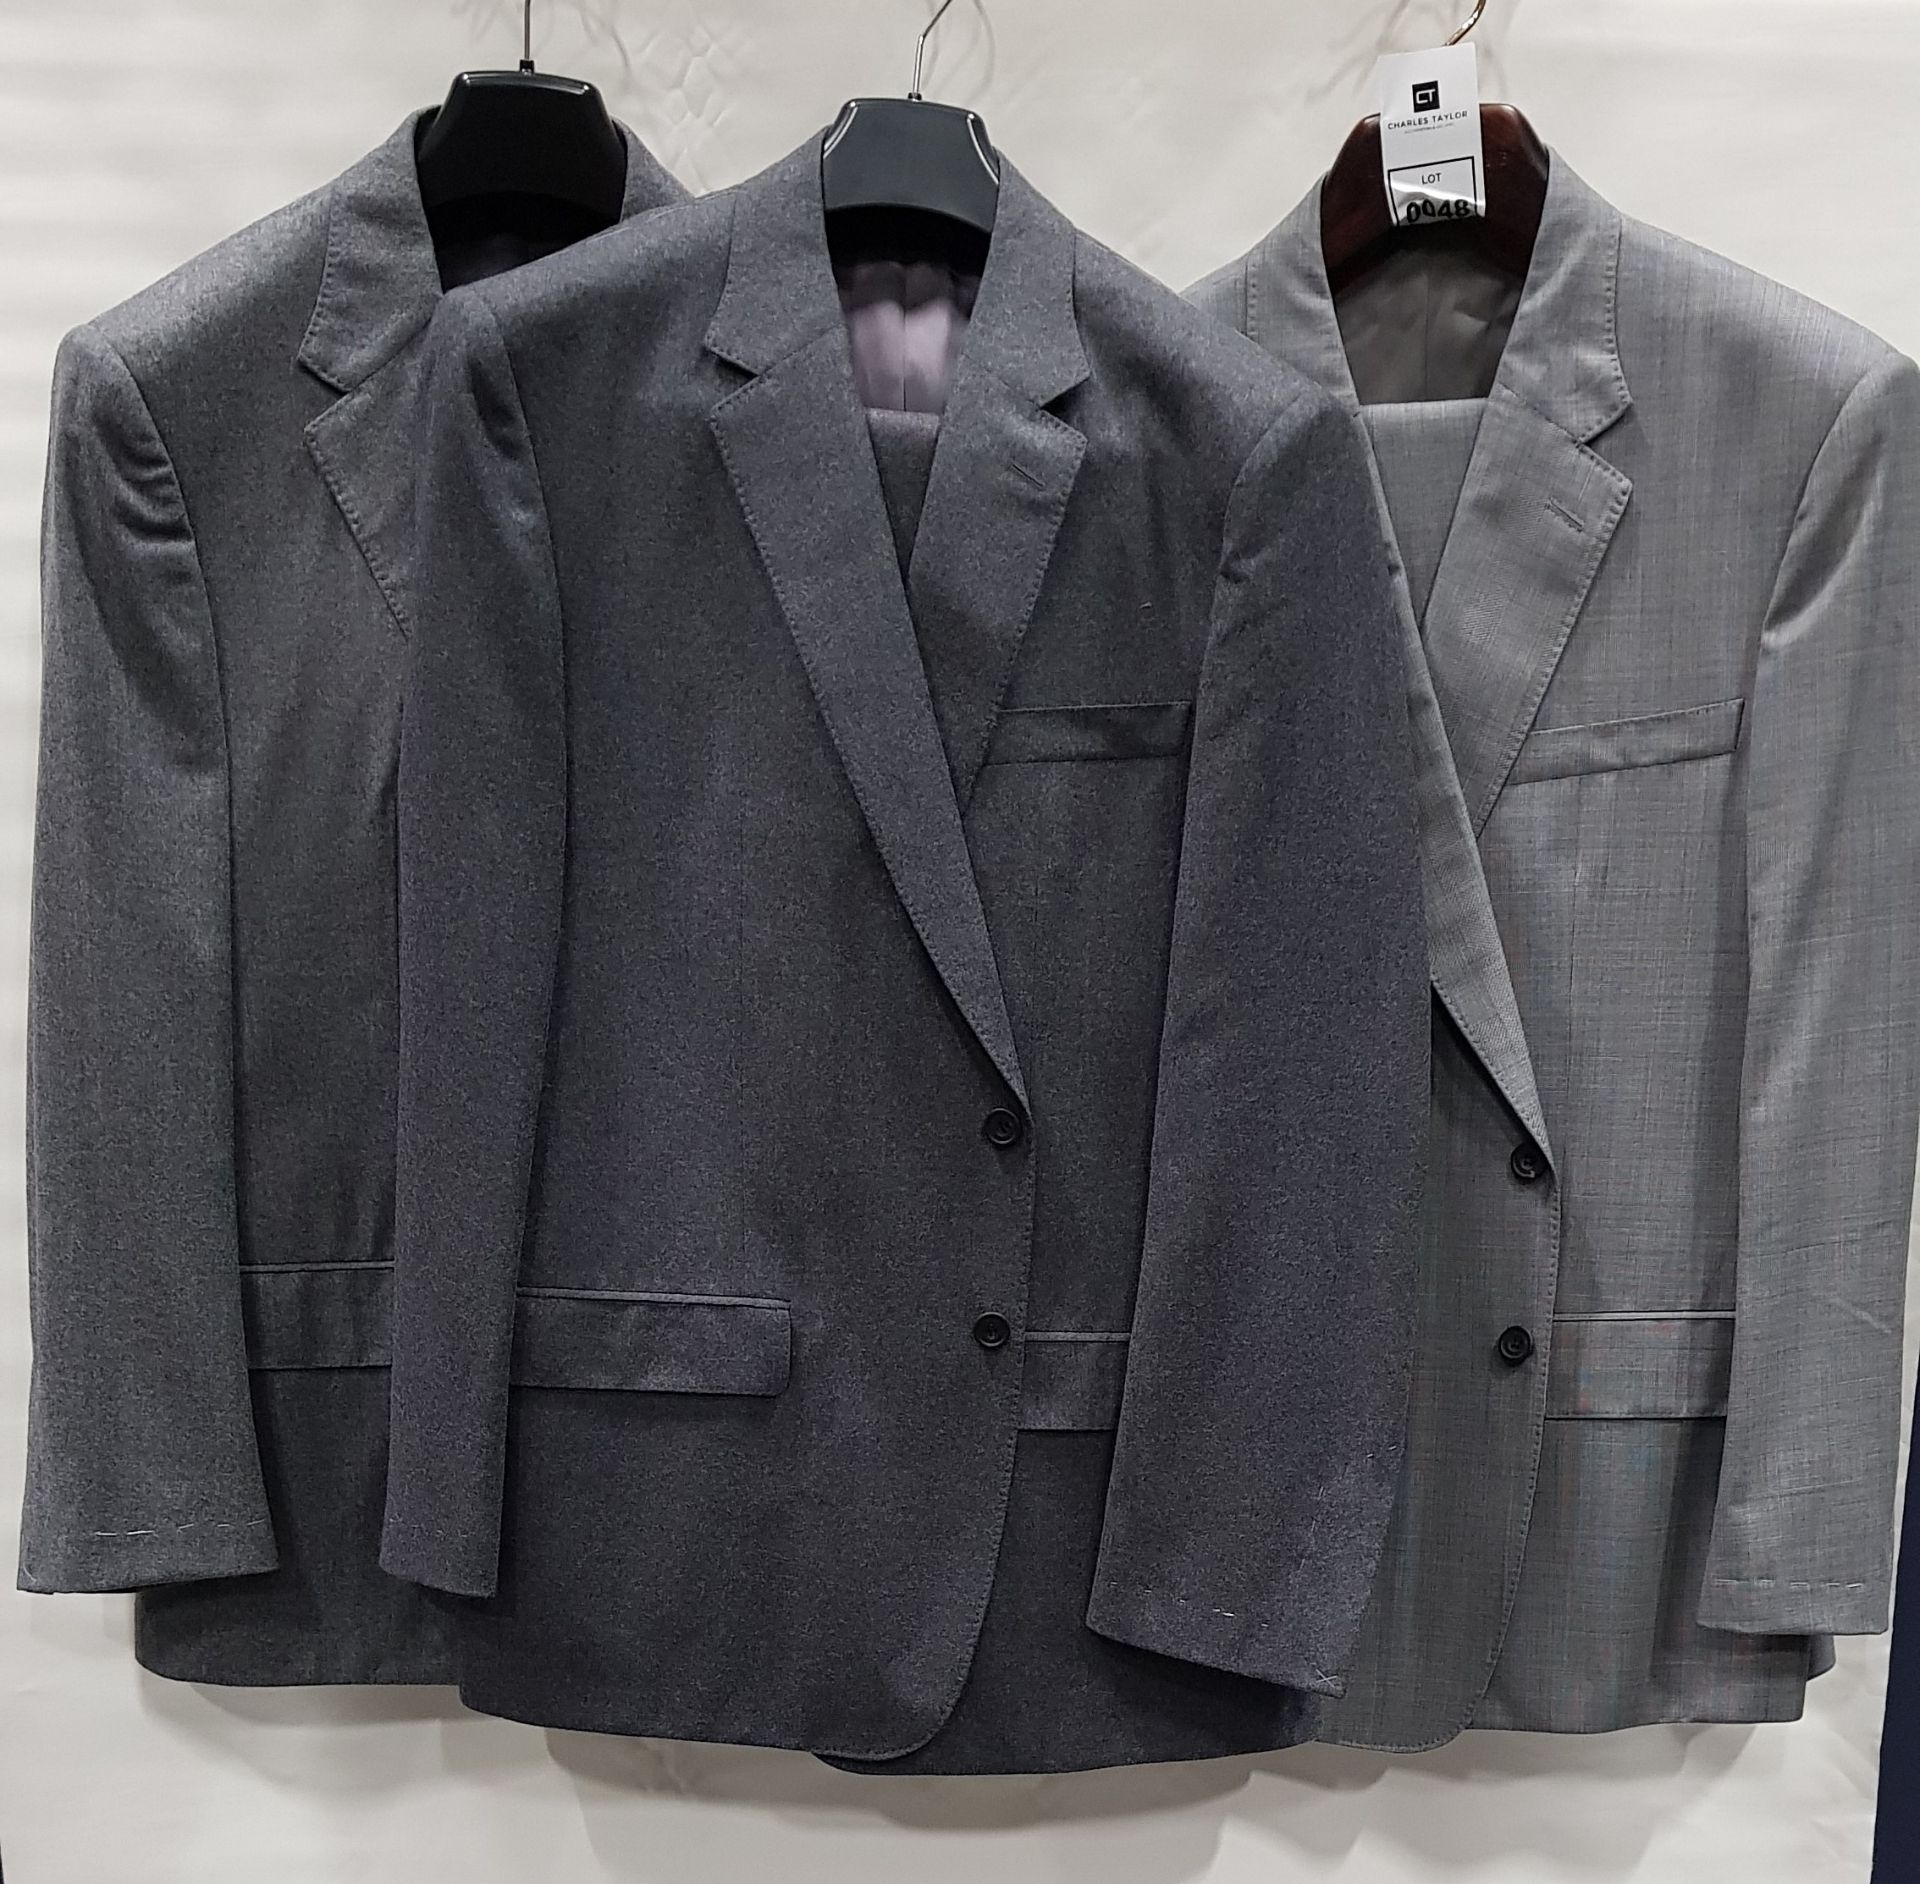 3 X BRAND NEW LUTWYCHE 2 PC GREY SHADES MATCHING SUITS SIZES 50R, 44R, 46R (NOTE NOT FULLY